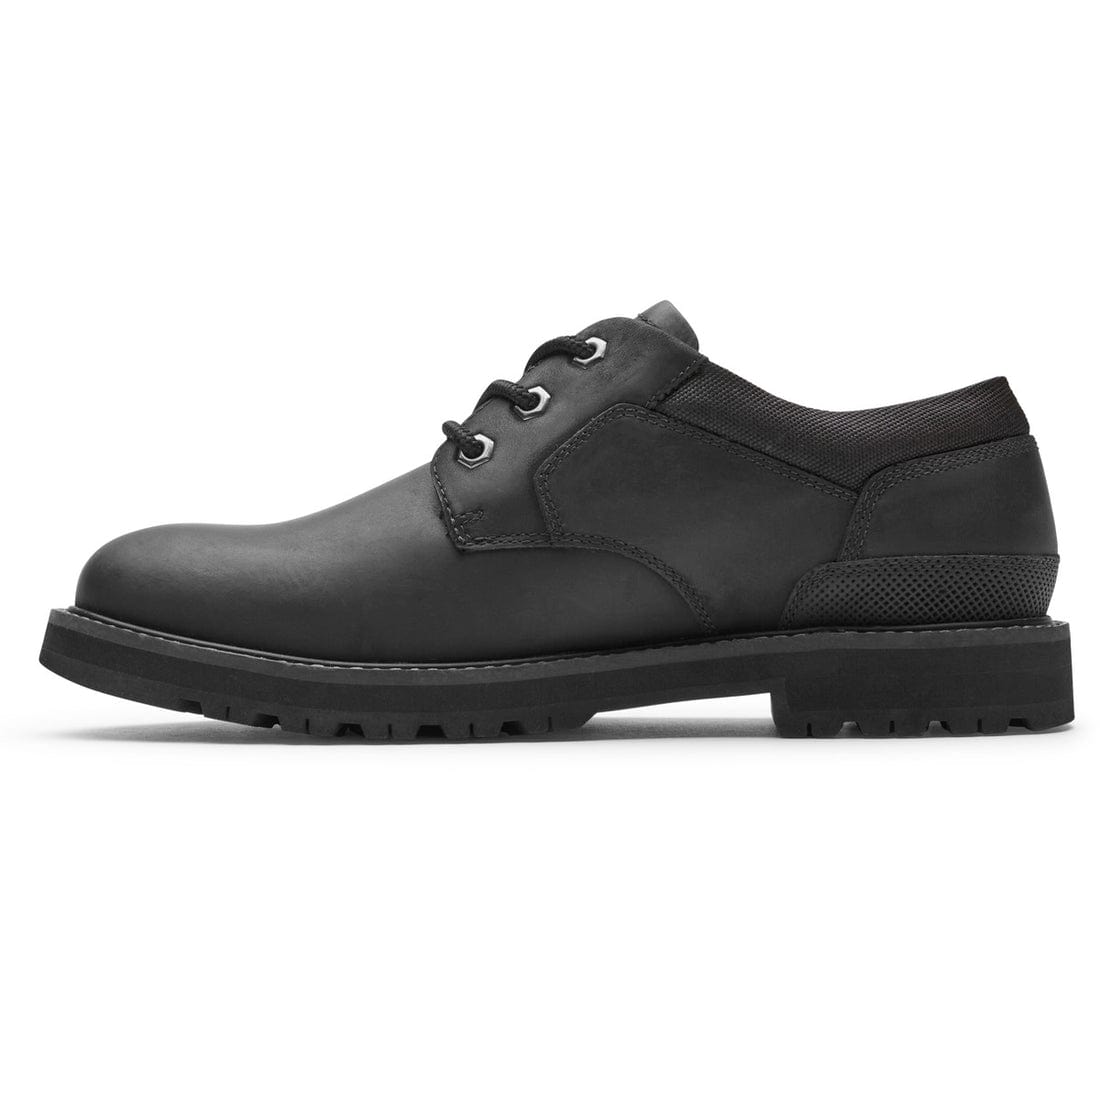 Byrne Oxford product image